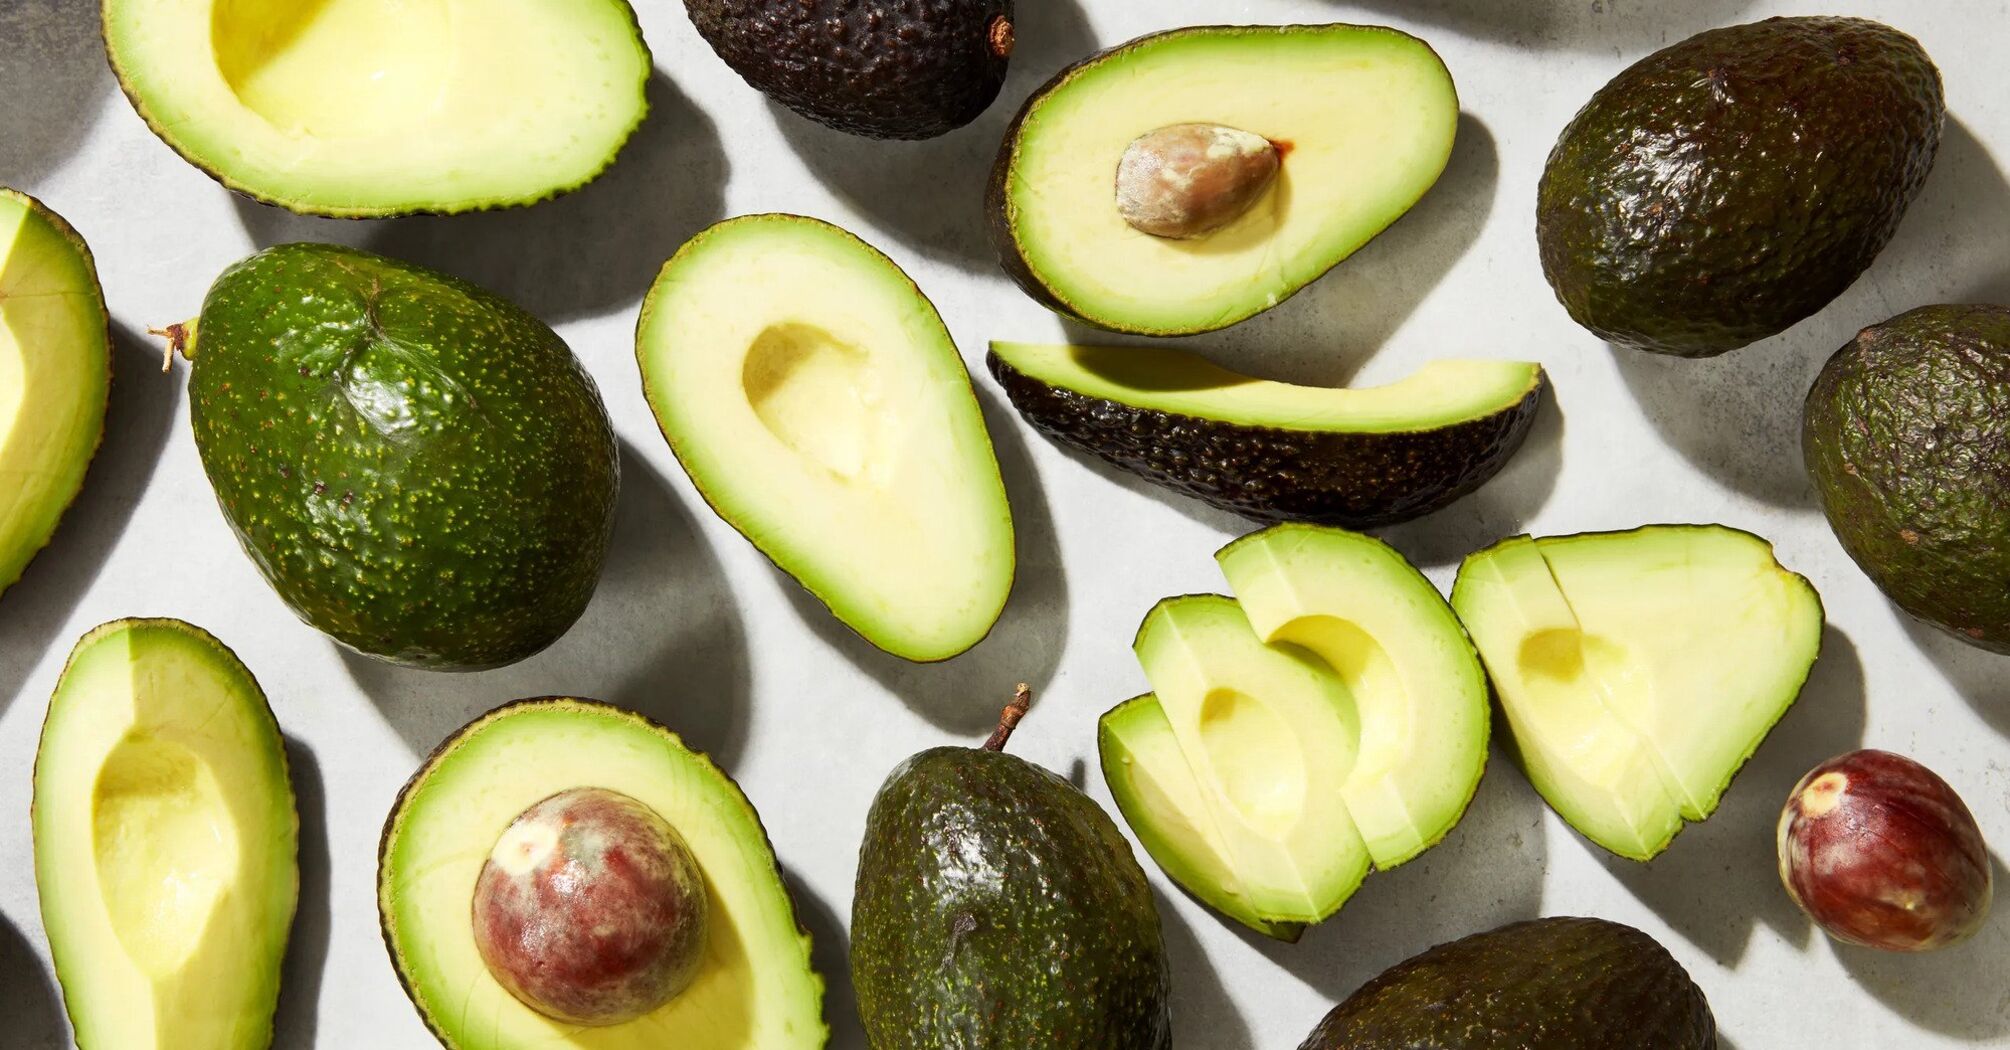 How to store avocados for weeks so that they don't spoil